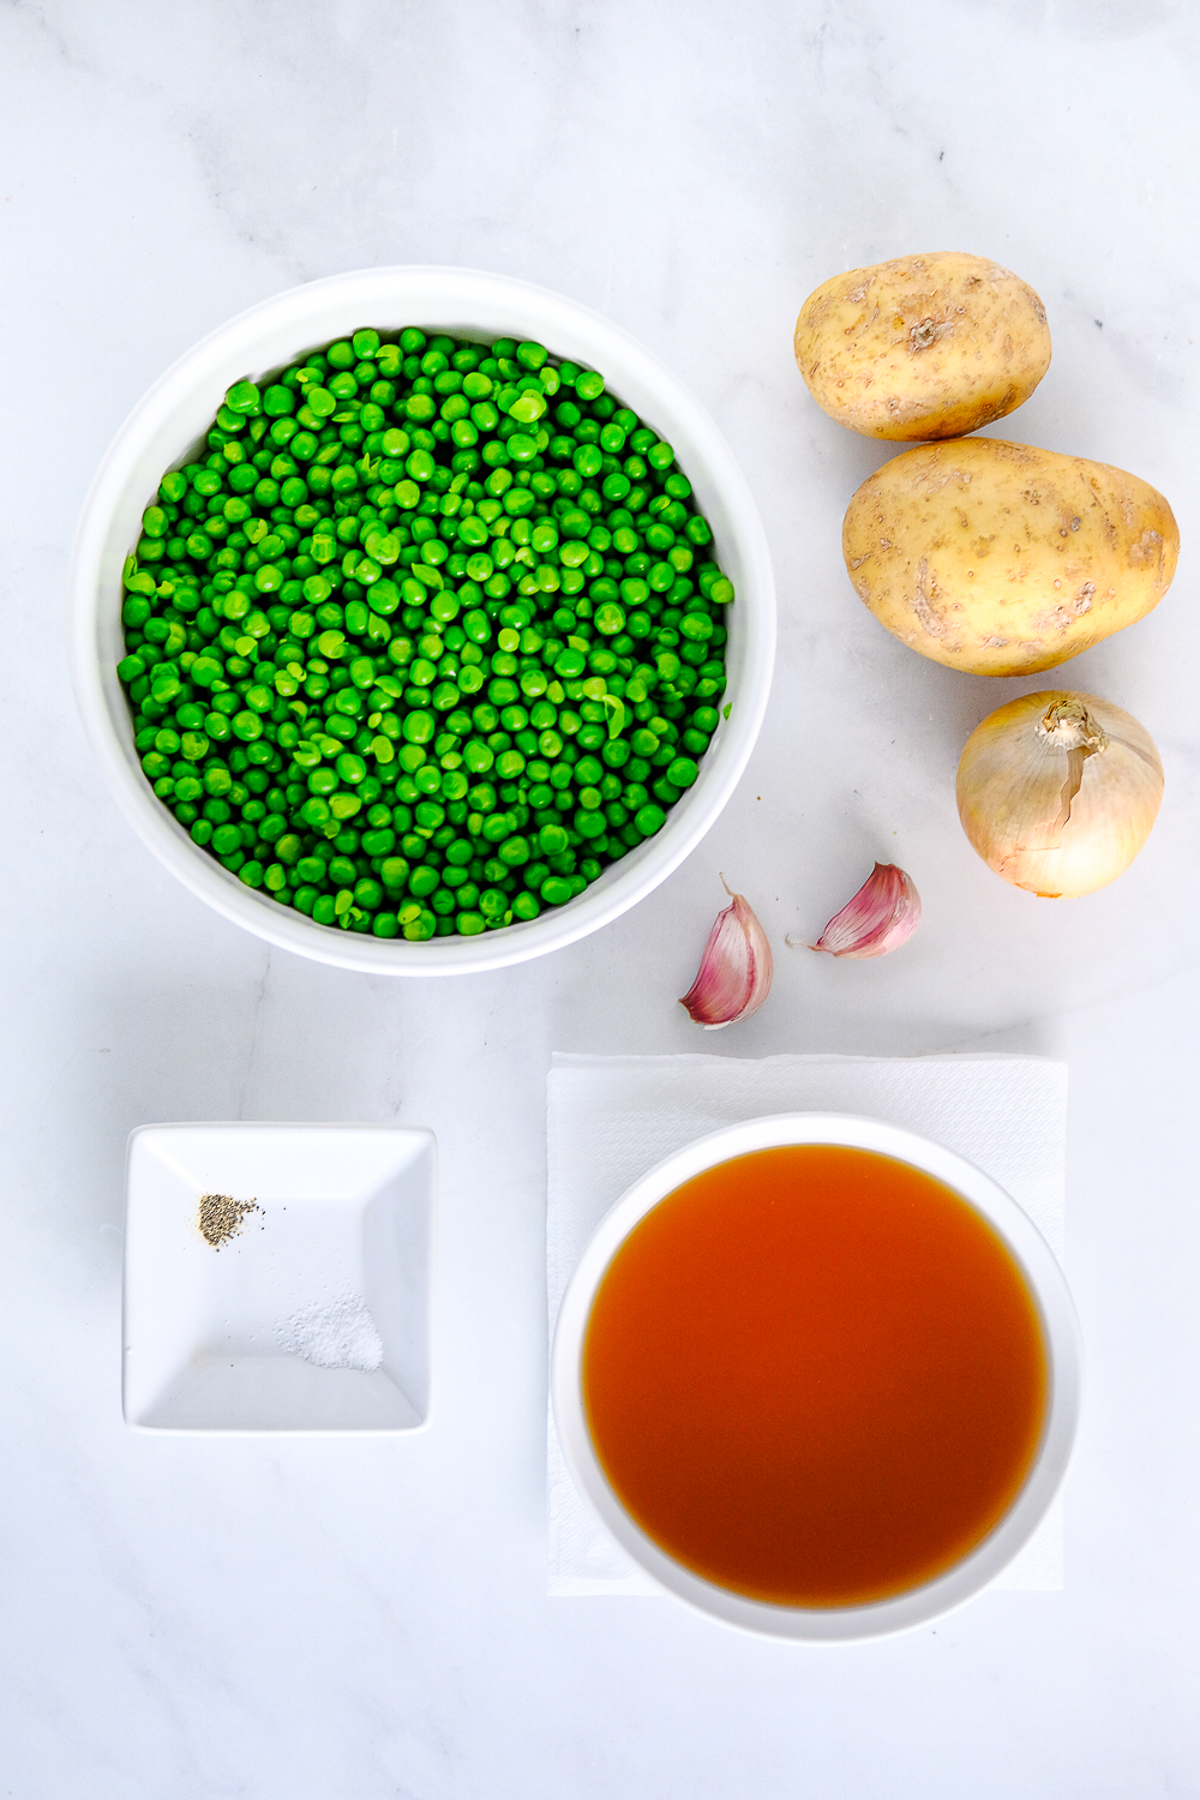 Ingredients needed to make a Pea Soup Recipe.